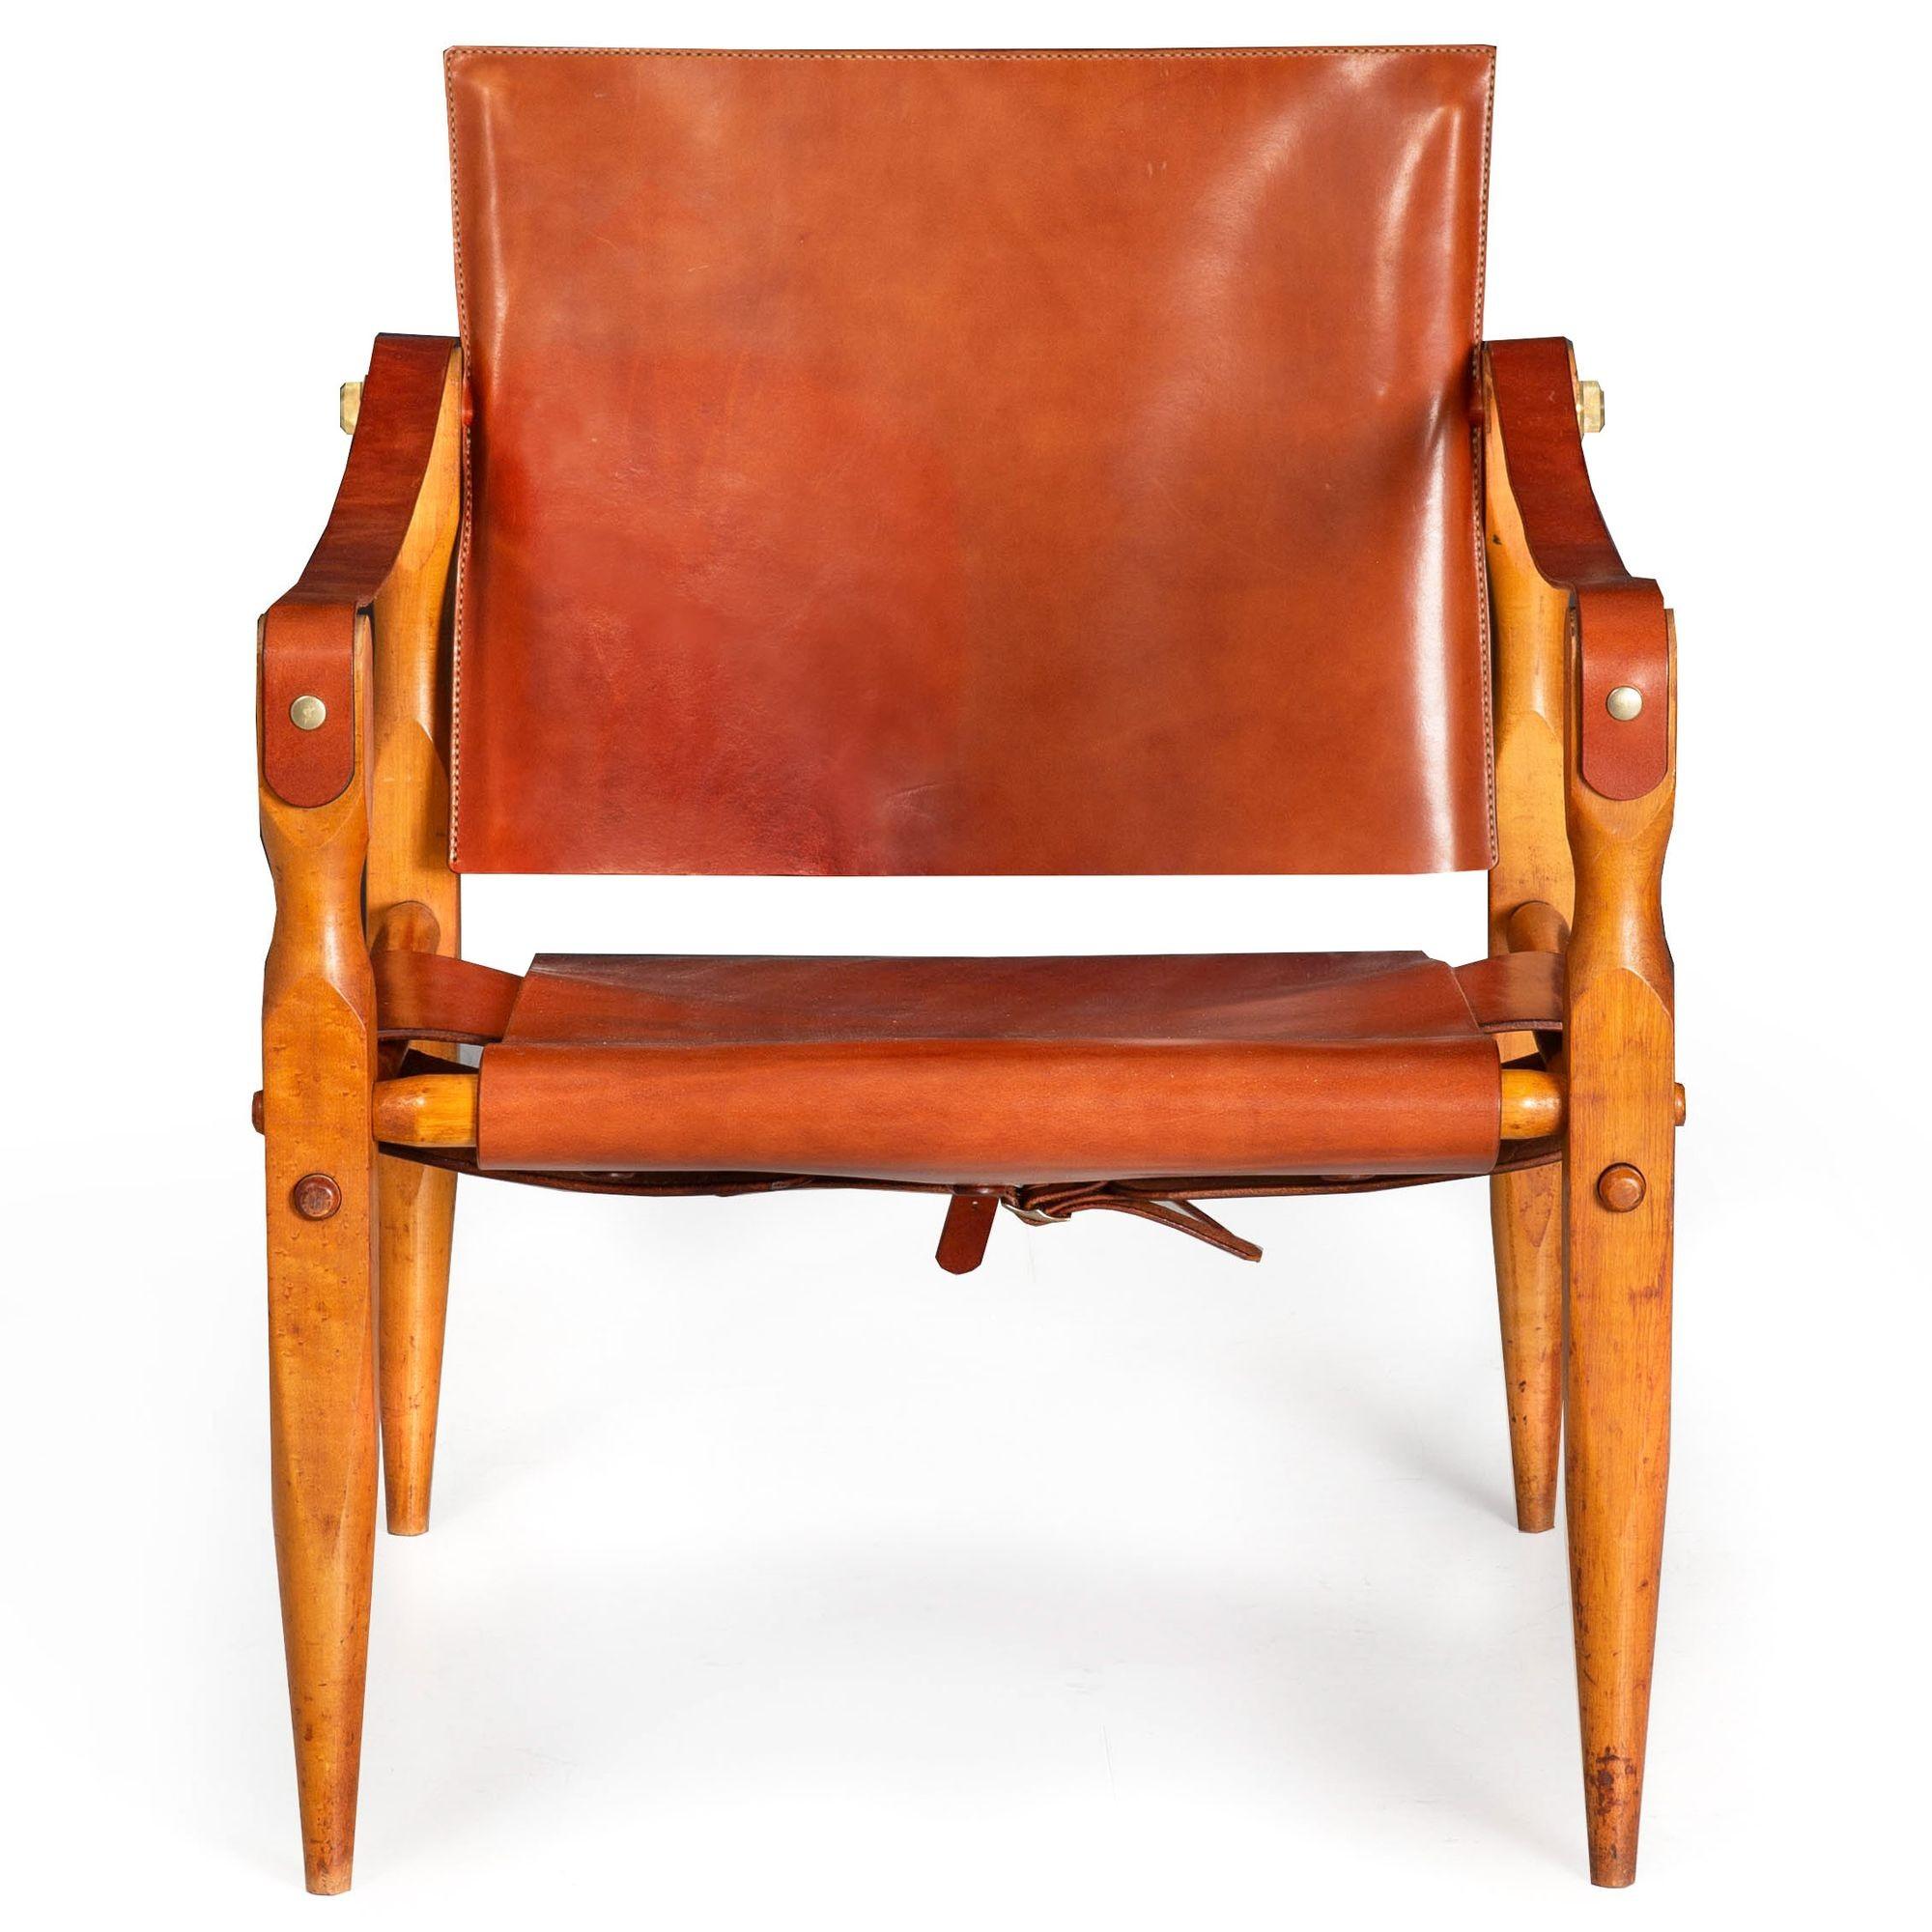 SCANDINAVIAN MODERN MAPLE & LEATHER SAFARI CHAIRS ATTRIBUTED TO WILHELM KIENZLE
Circa 1970  unmarked  brand new expertly crafted leather and custom machined hardware  a pair to this chair may still remain available
Item # 306YRC27L-1

An absolutely